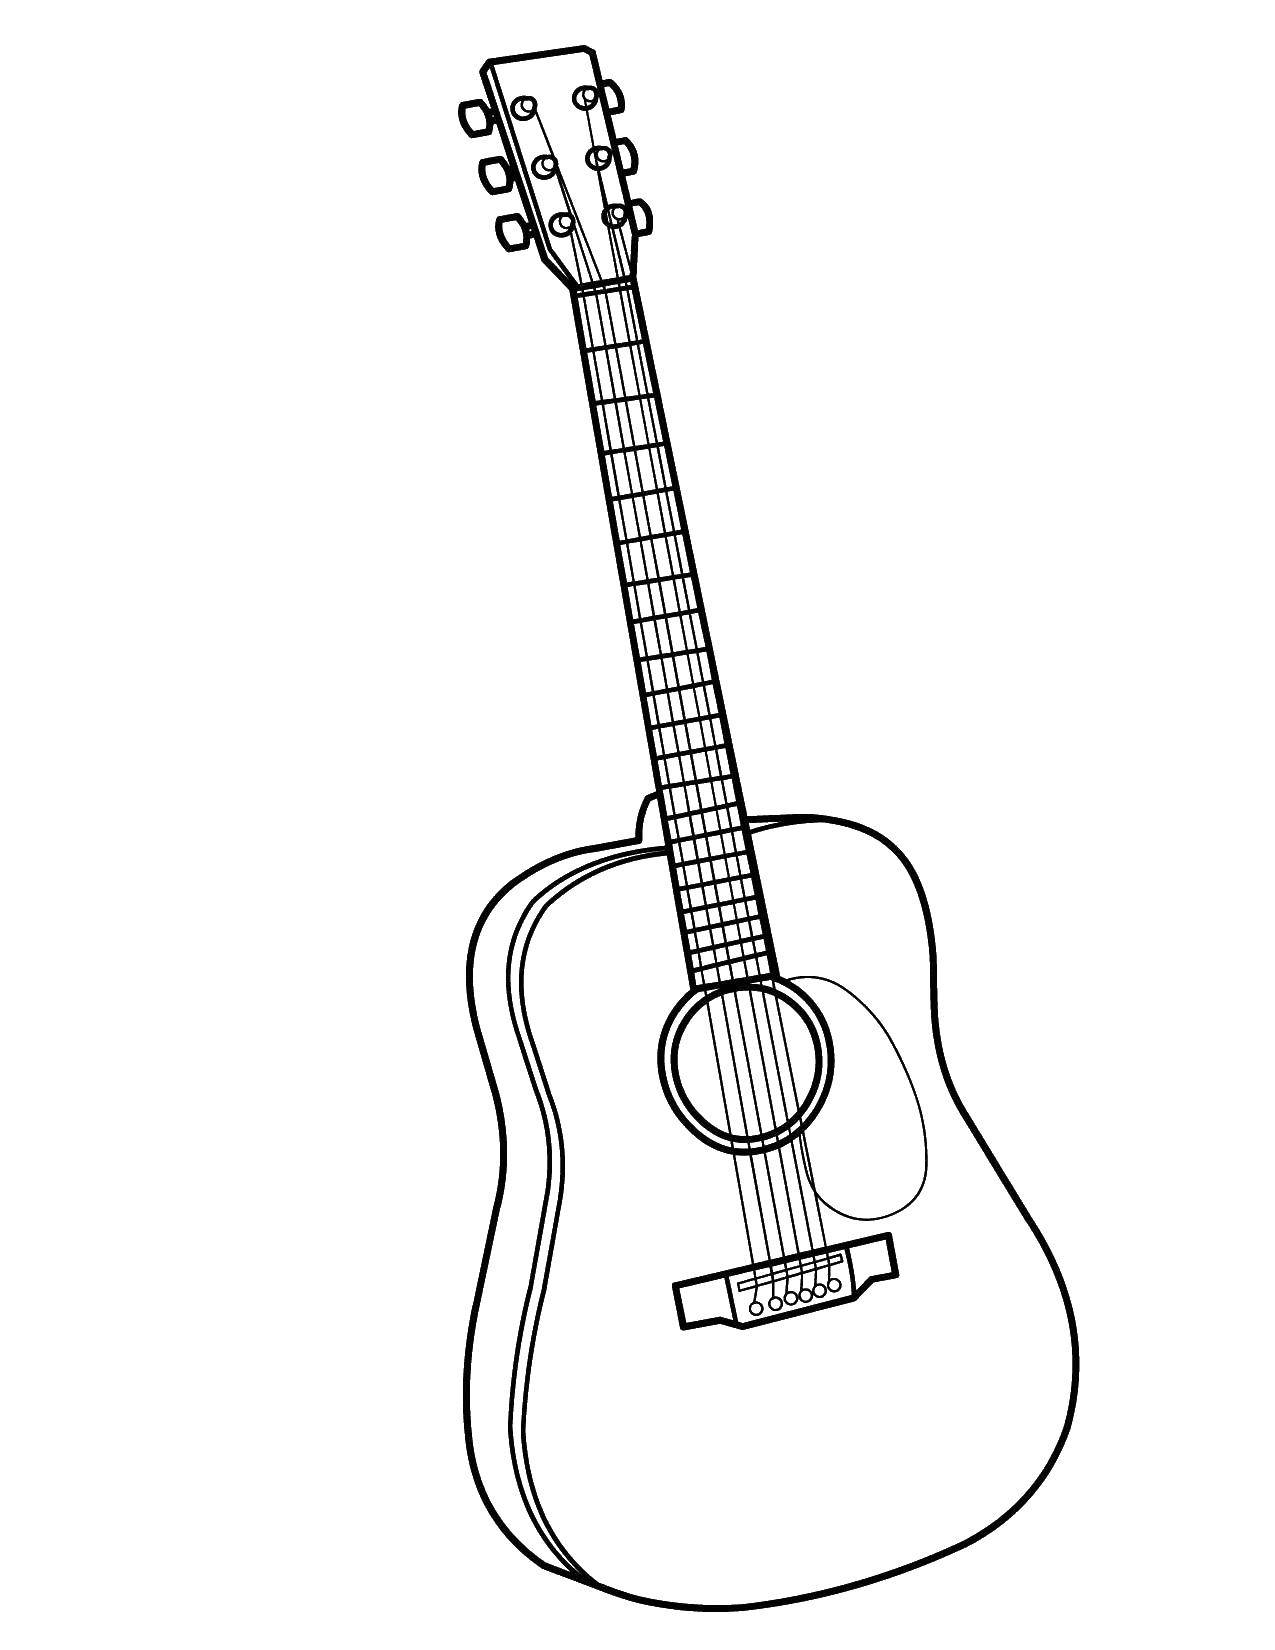 Coloring Guitar strings. Category musical instruments . Tags:  Music, instrument, musician, note.